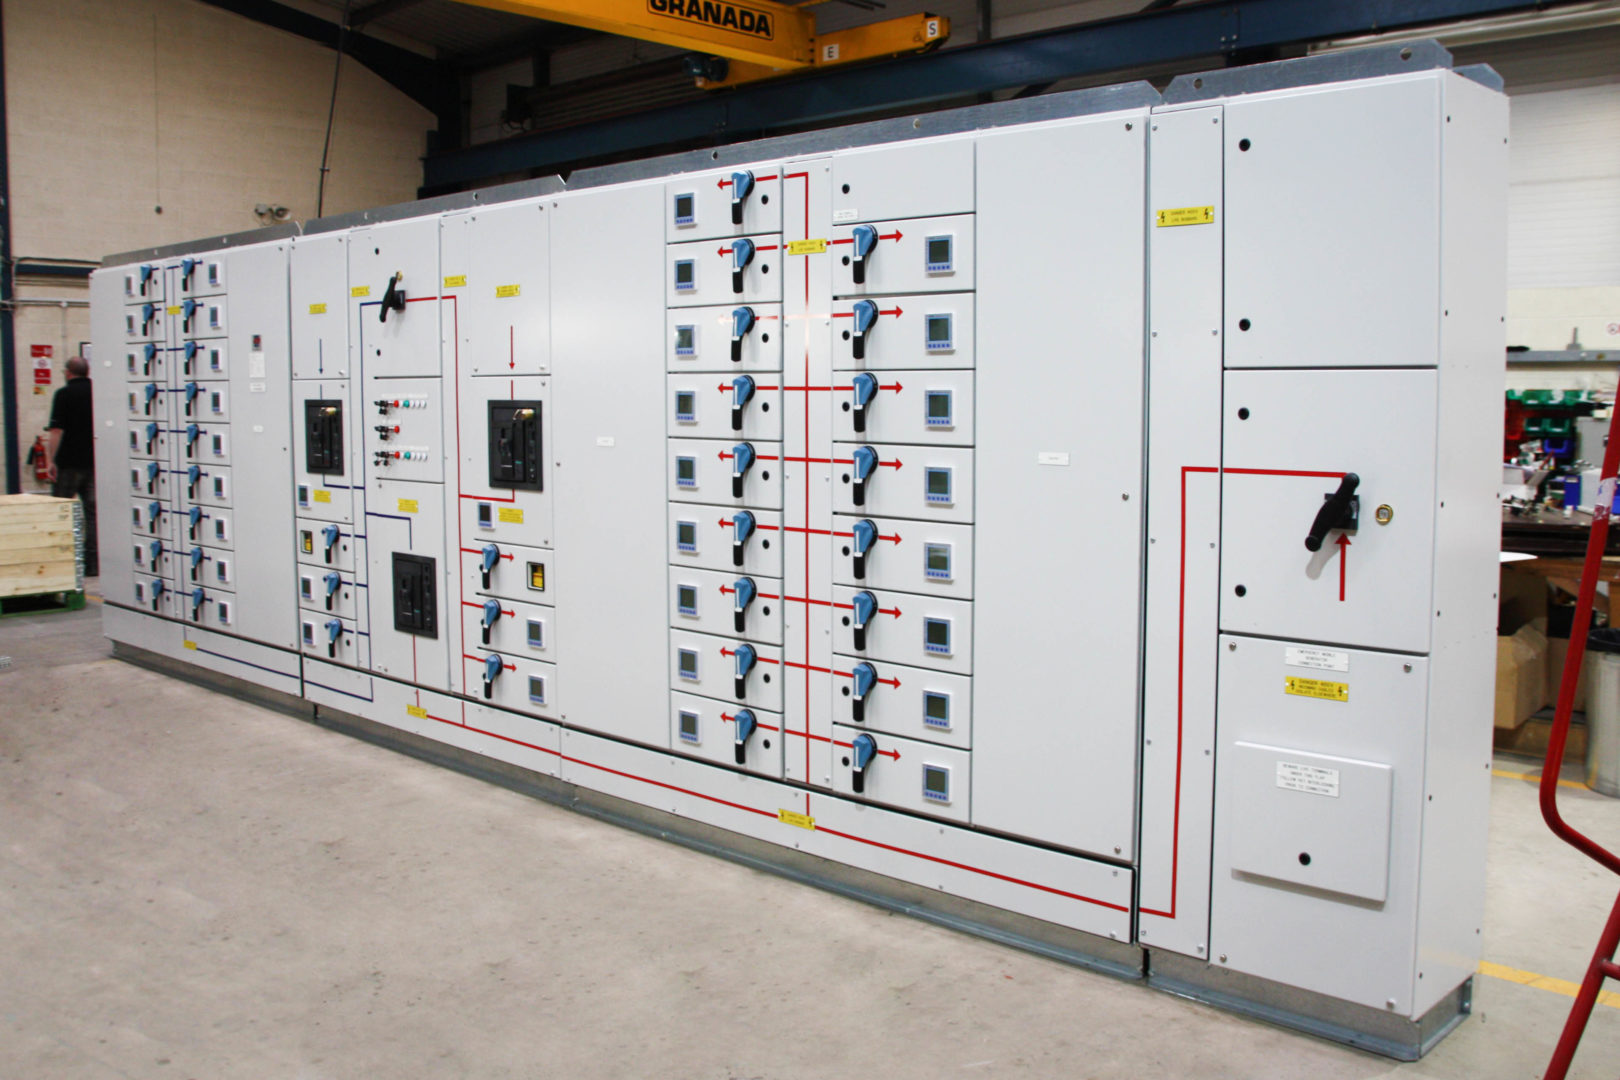 LV Switchgear - To retrofit or replace?